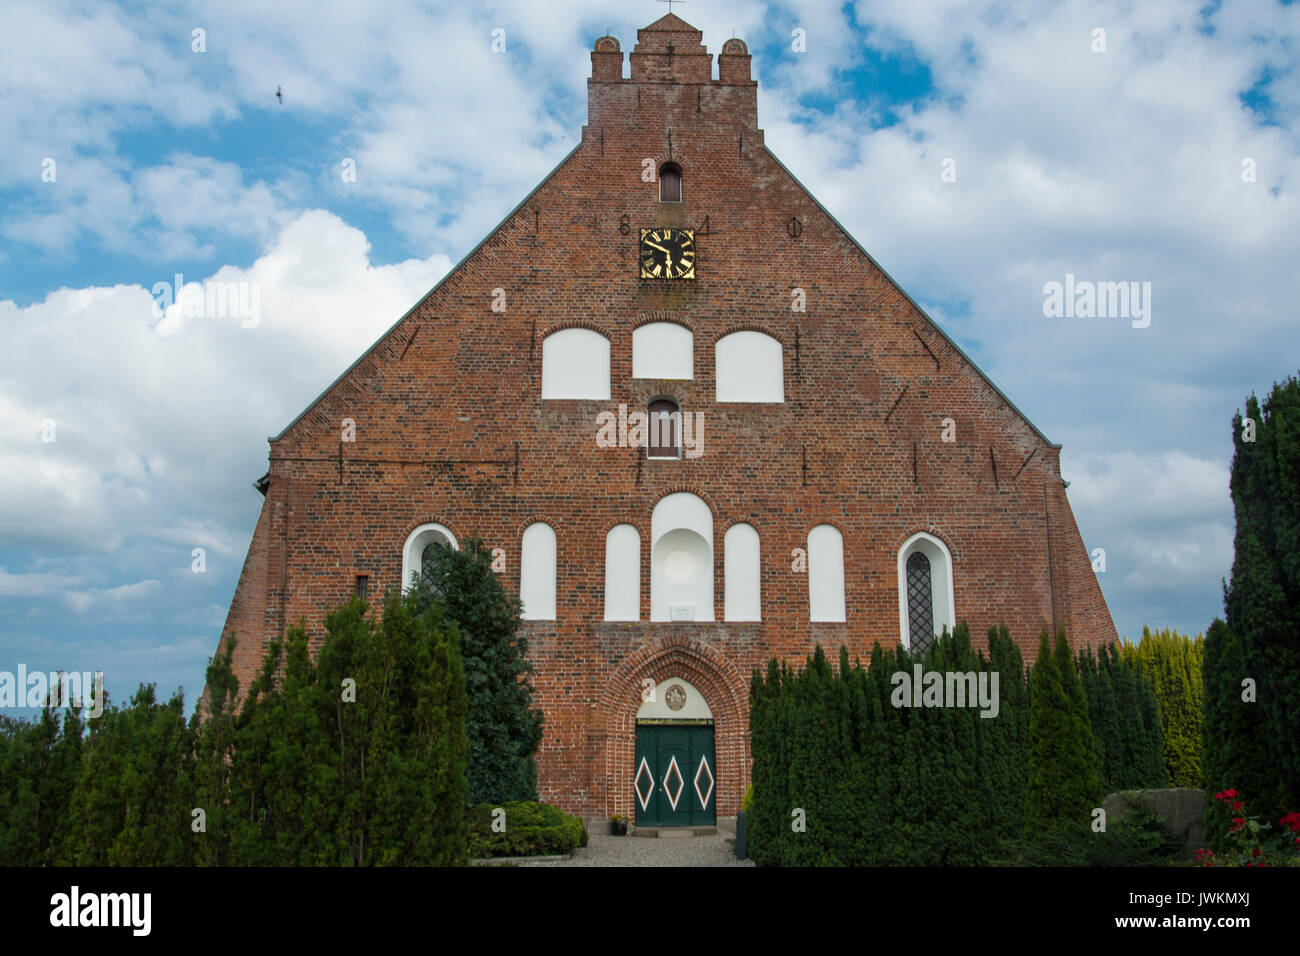 Petrikirche at Landkirchen, the oldest church on Fehmarn Island, founded ca. 1230 AD, Holstein, Germany Stock Photo